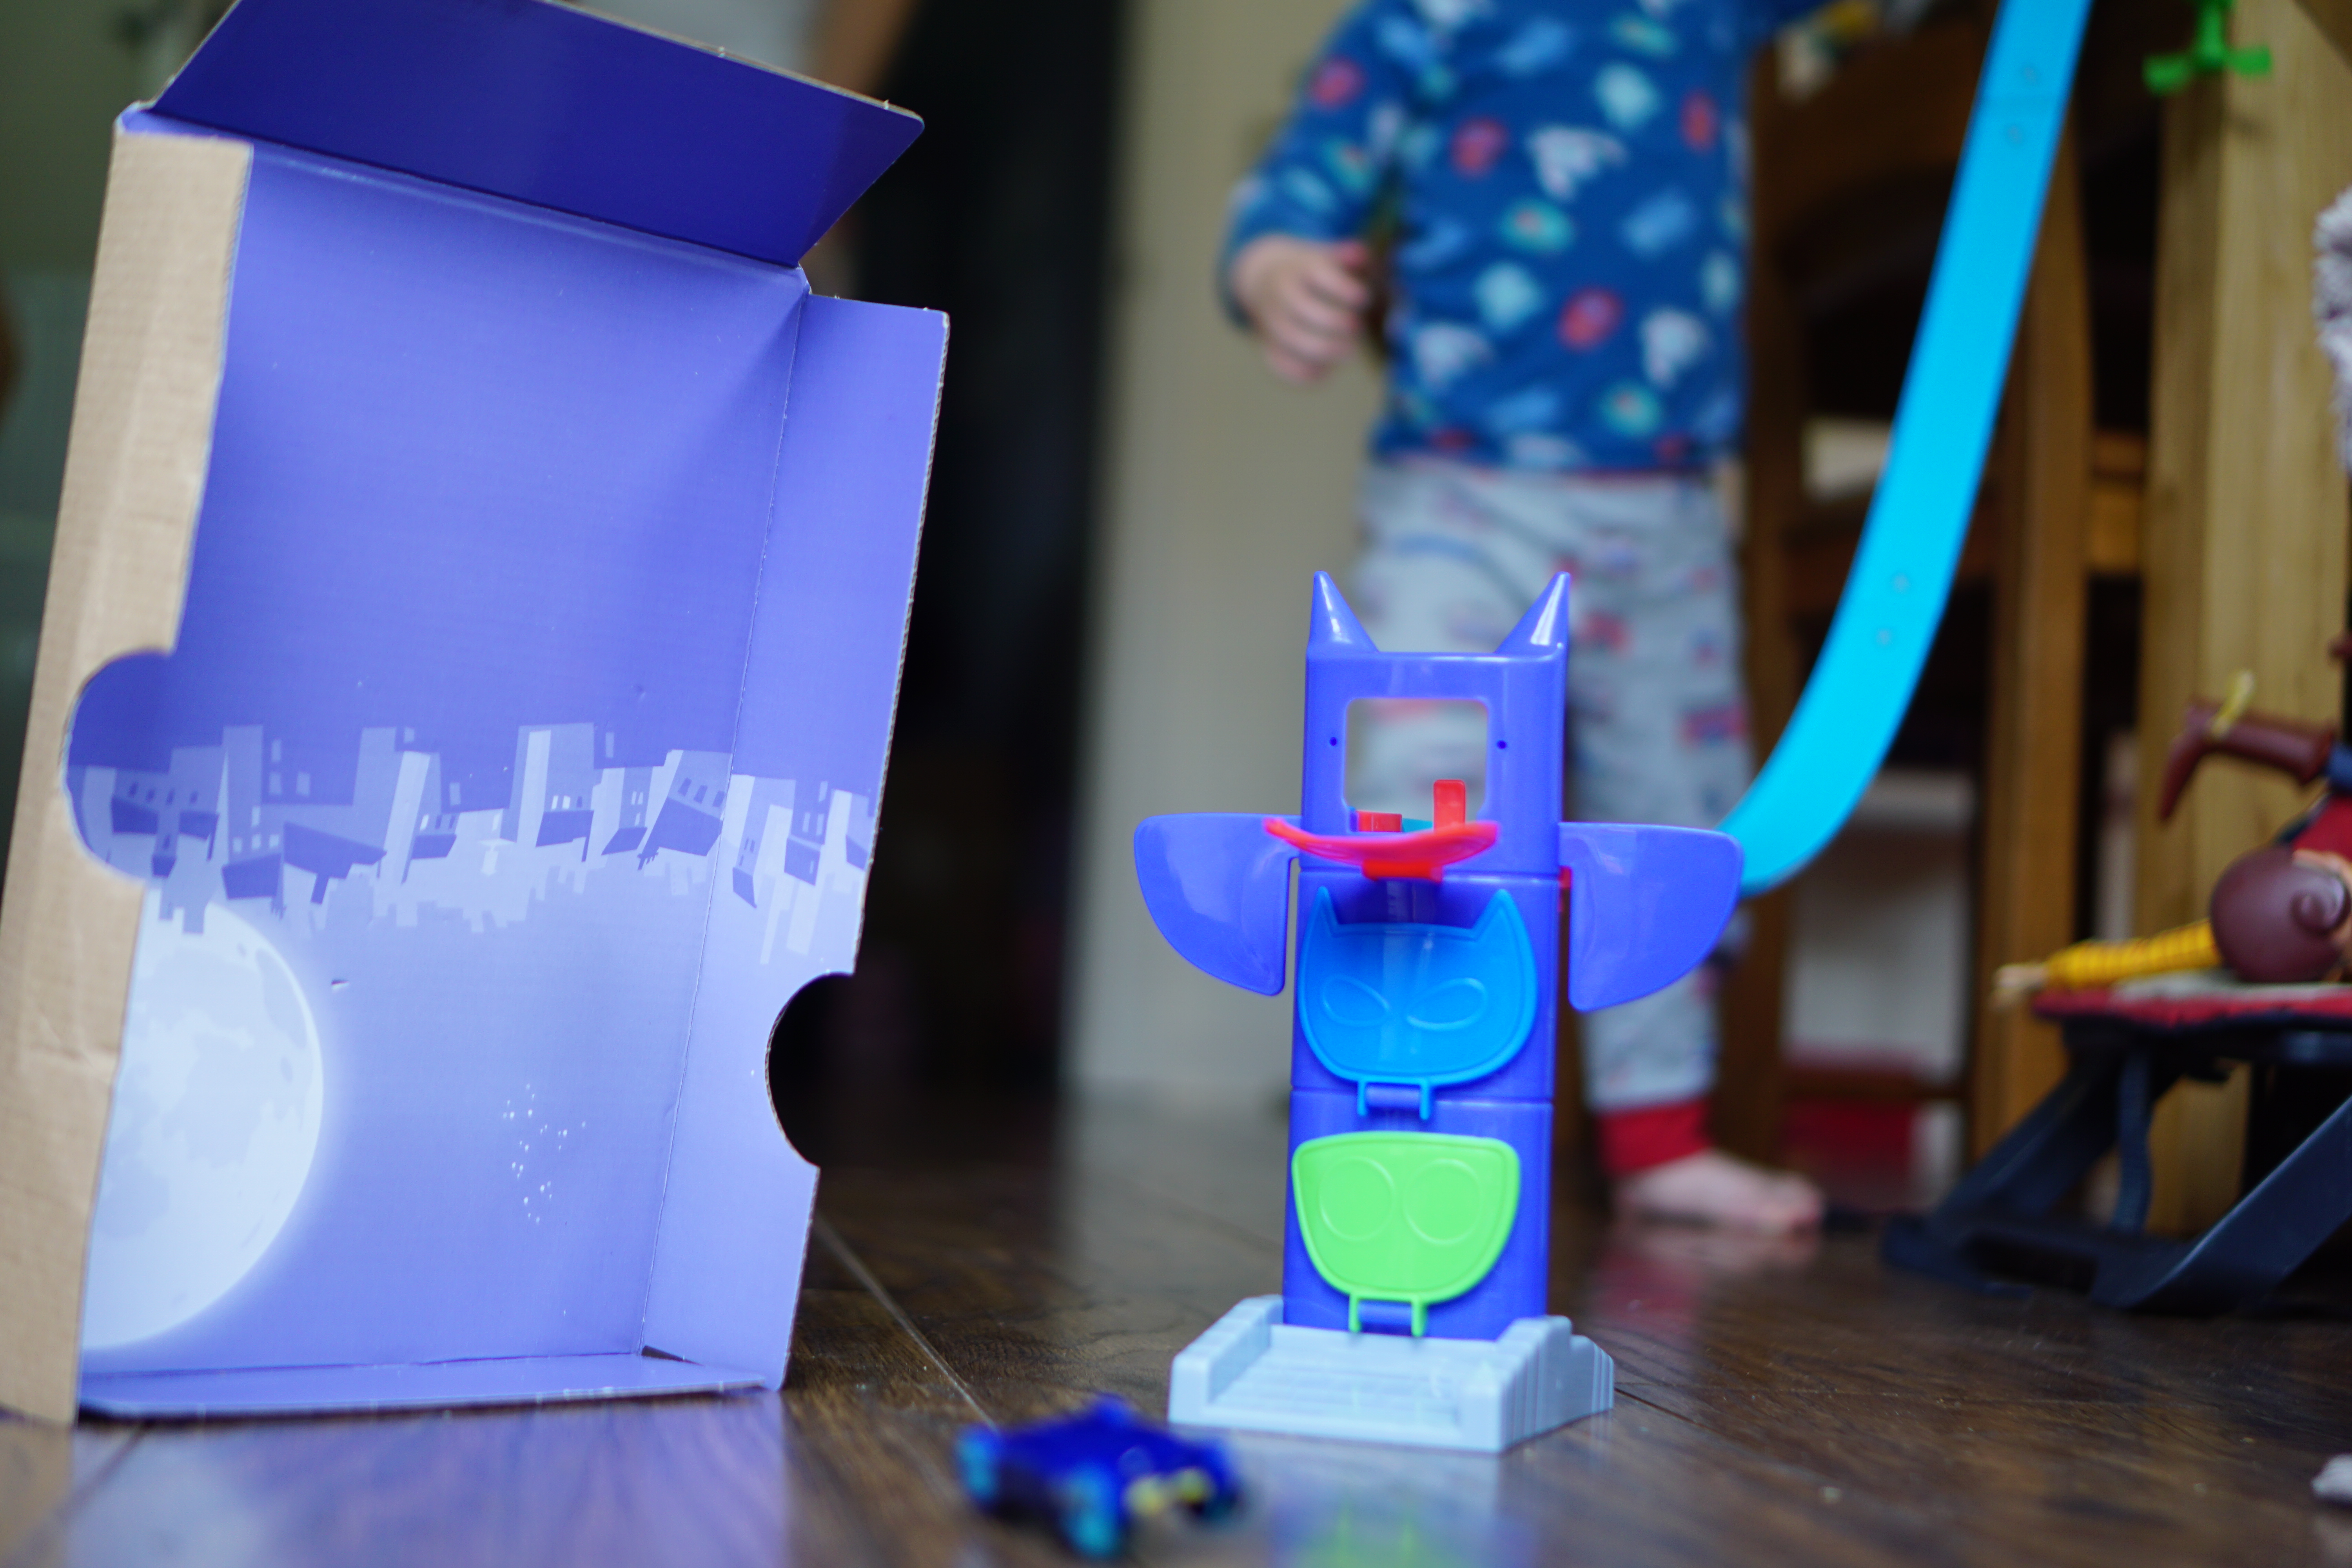 Best PJ Masks Toys for toddlers - Save the City Track and Headquarter Launcher.